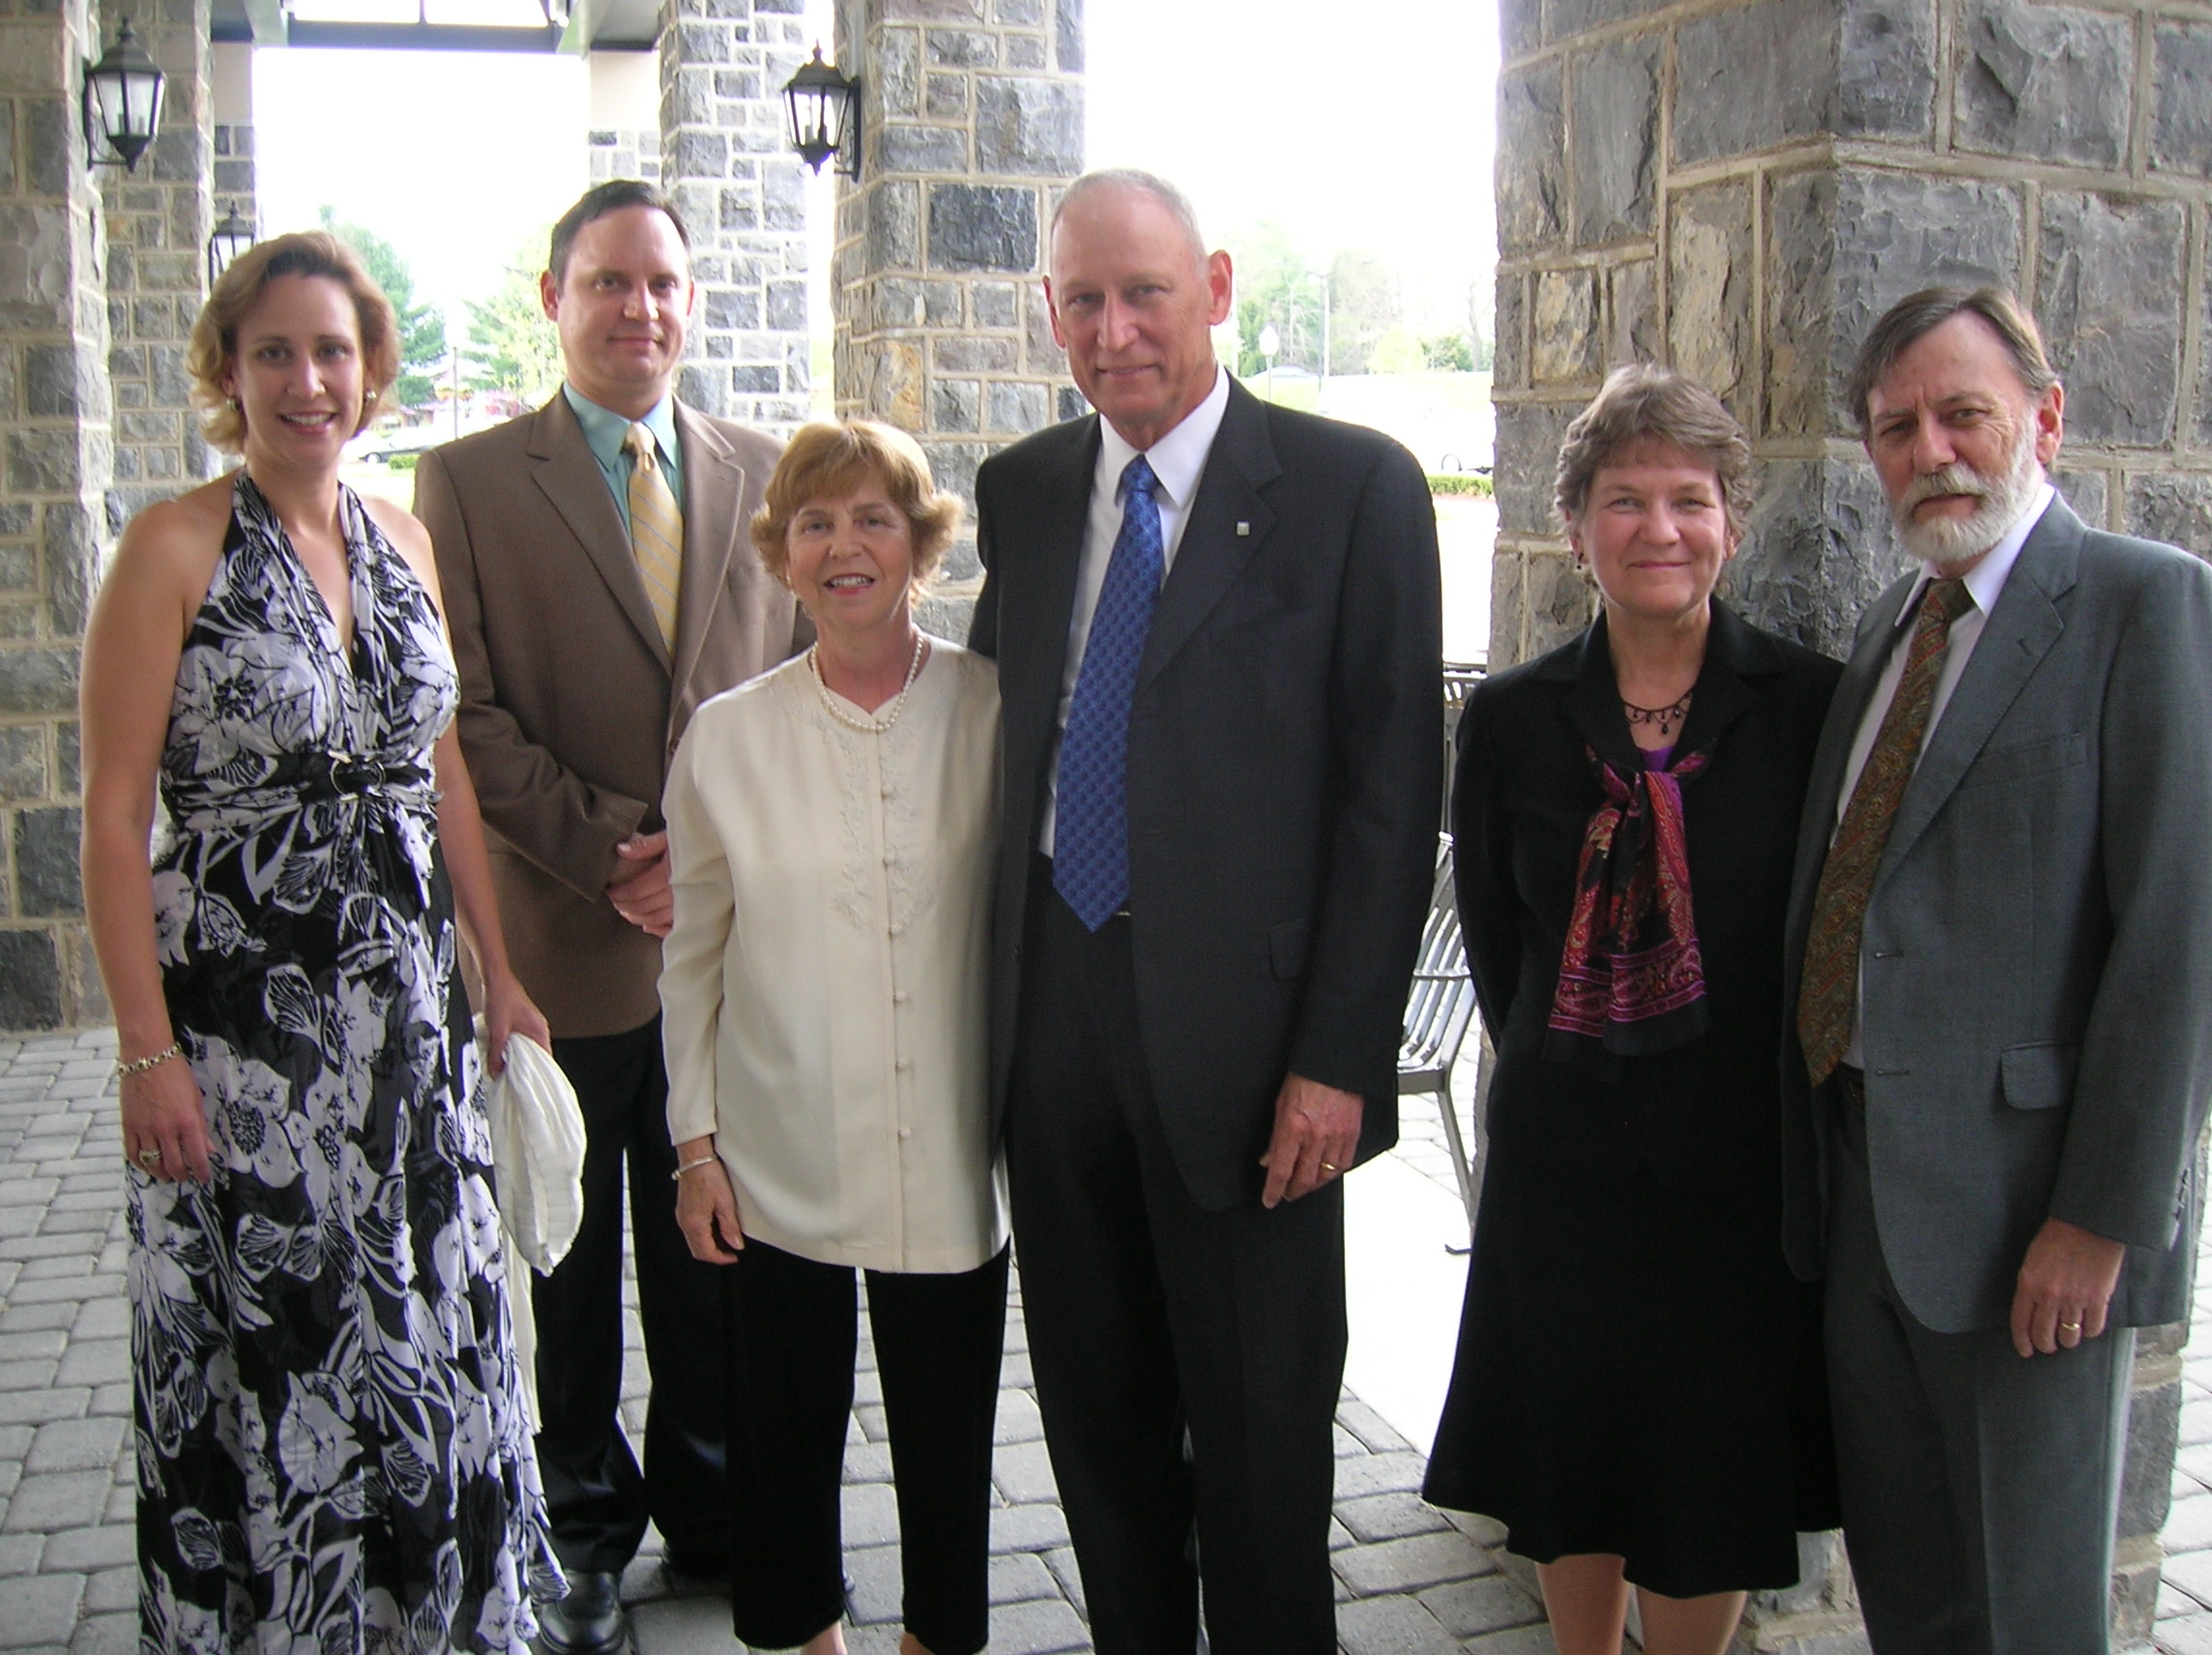 Pictured from left to right are: Christine M. Holzem, daughter of the McKinneys and Virginia Tech alumna; Arthur W. McKinney Jr., son of the McKinneys and Virginia Tech alumnus; Jerry McKinney; Art McKinney; and Connee and Russ McKinney, Art's brother and sister-in-law.